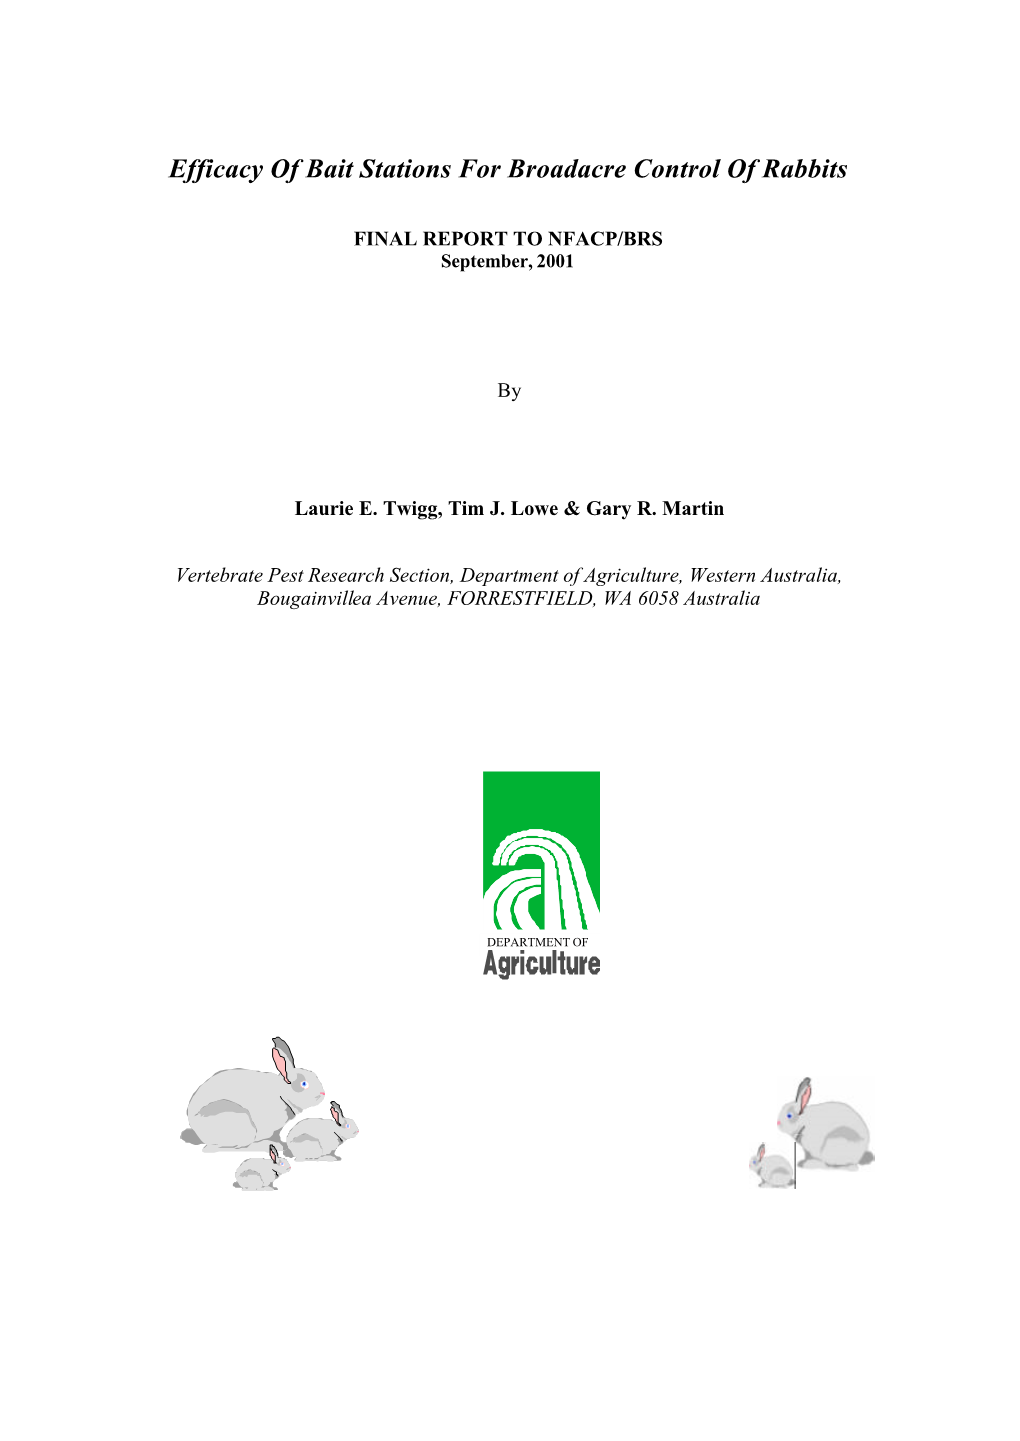 Efficacy of Bait Stations for Broadacre Control of Rabbits